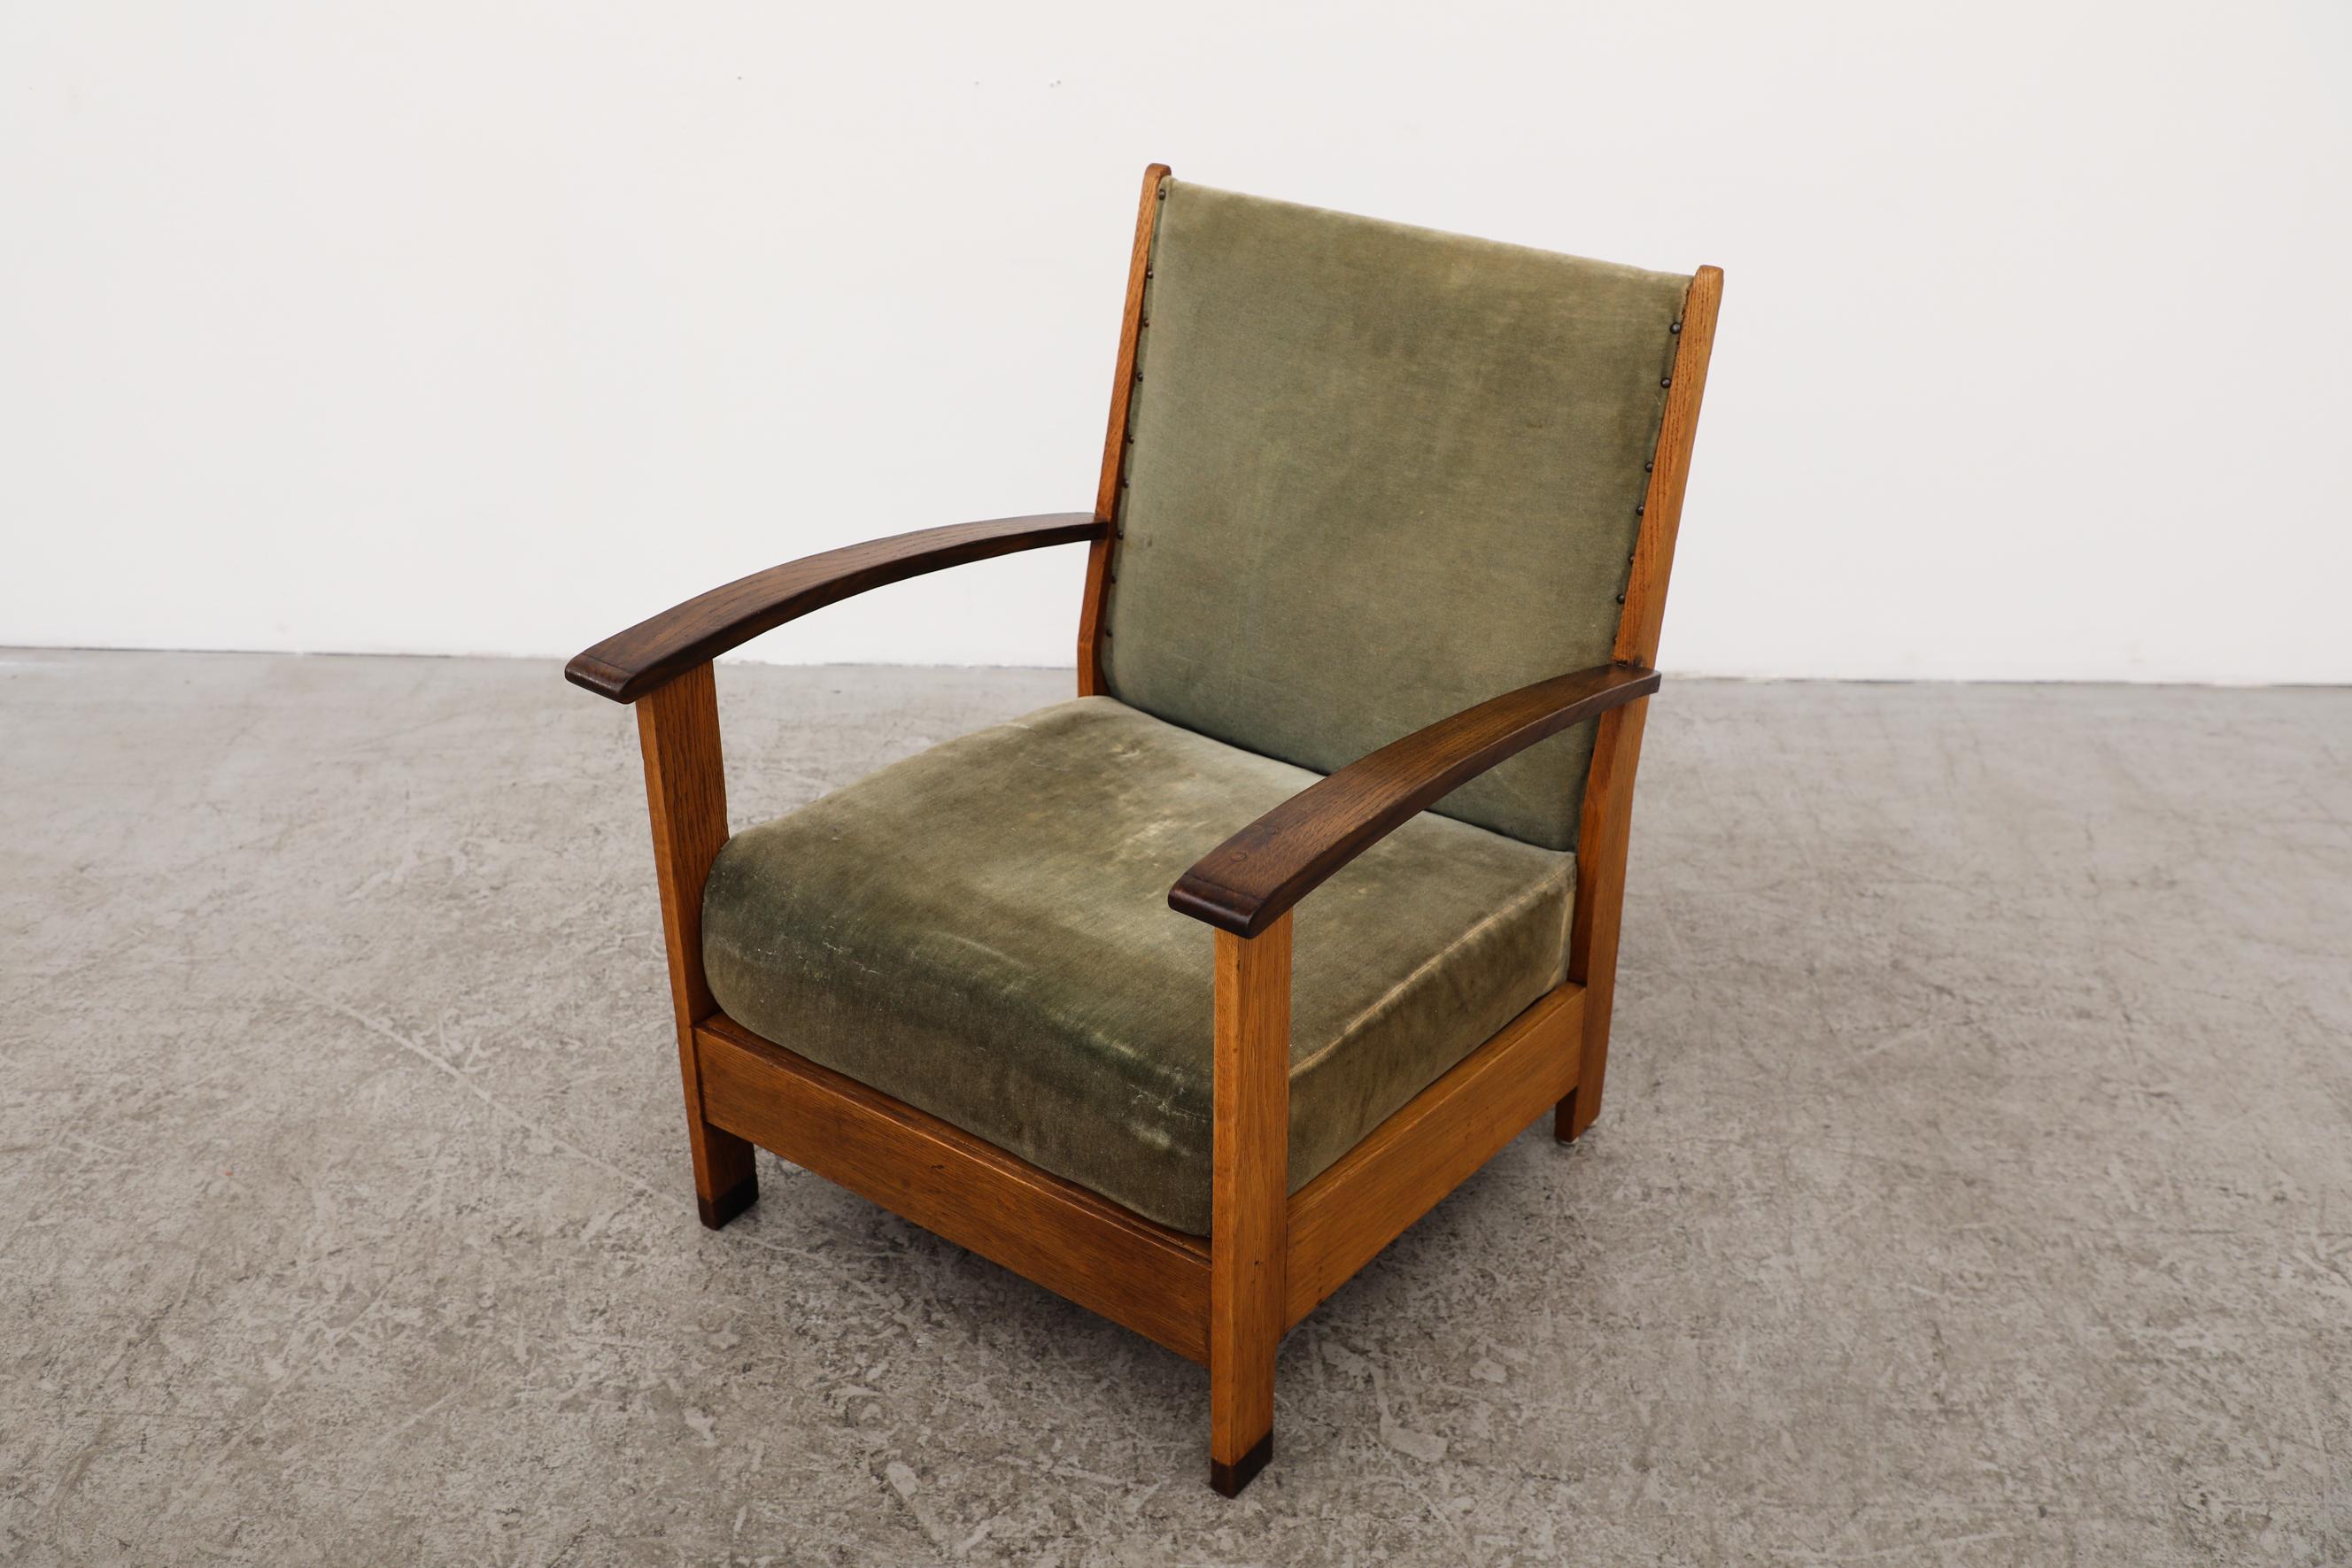 Original Dutch Art Deco Oak Lounge Chair w/ Curved Armrests & Green Upholstery For Sale 5